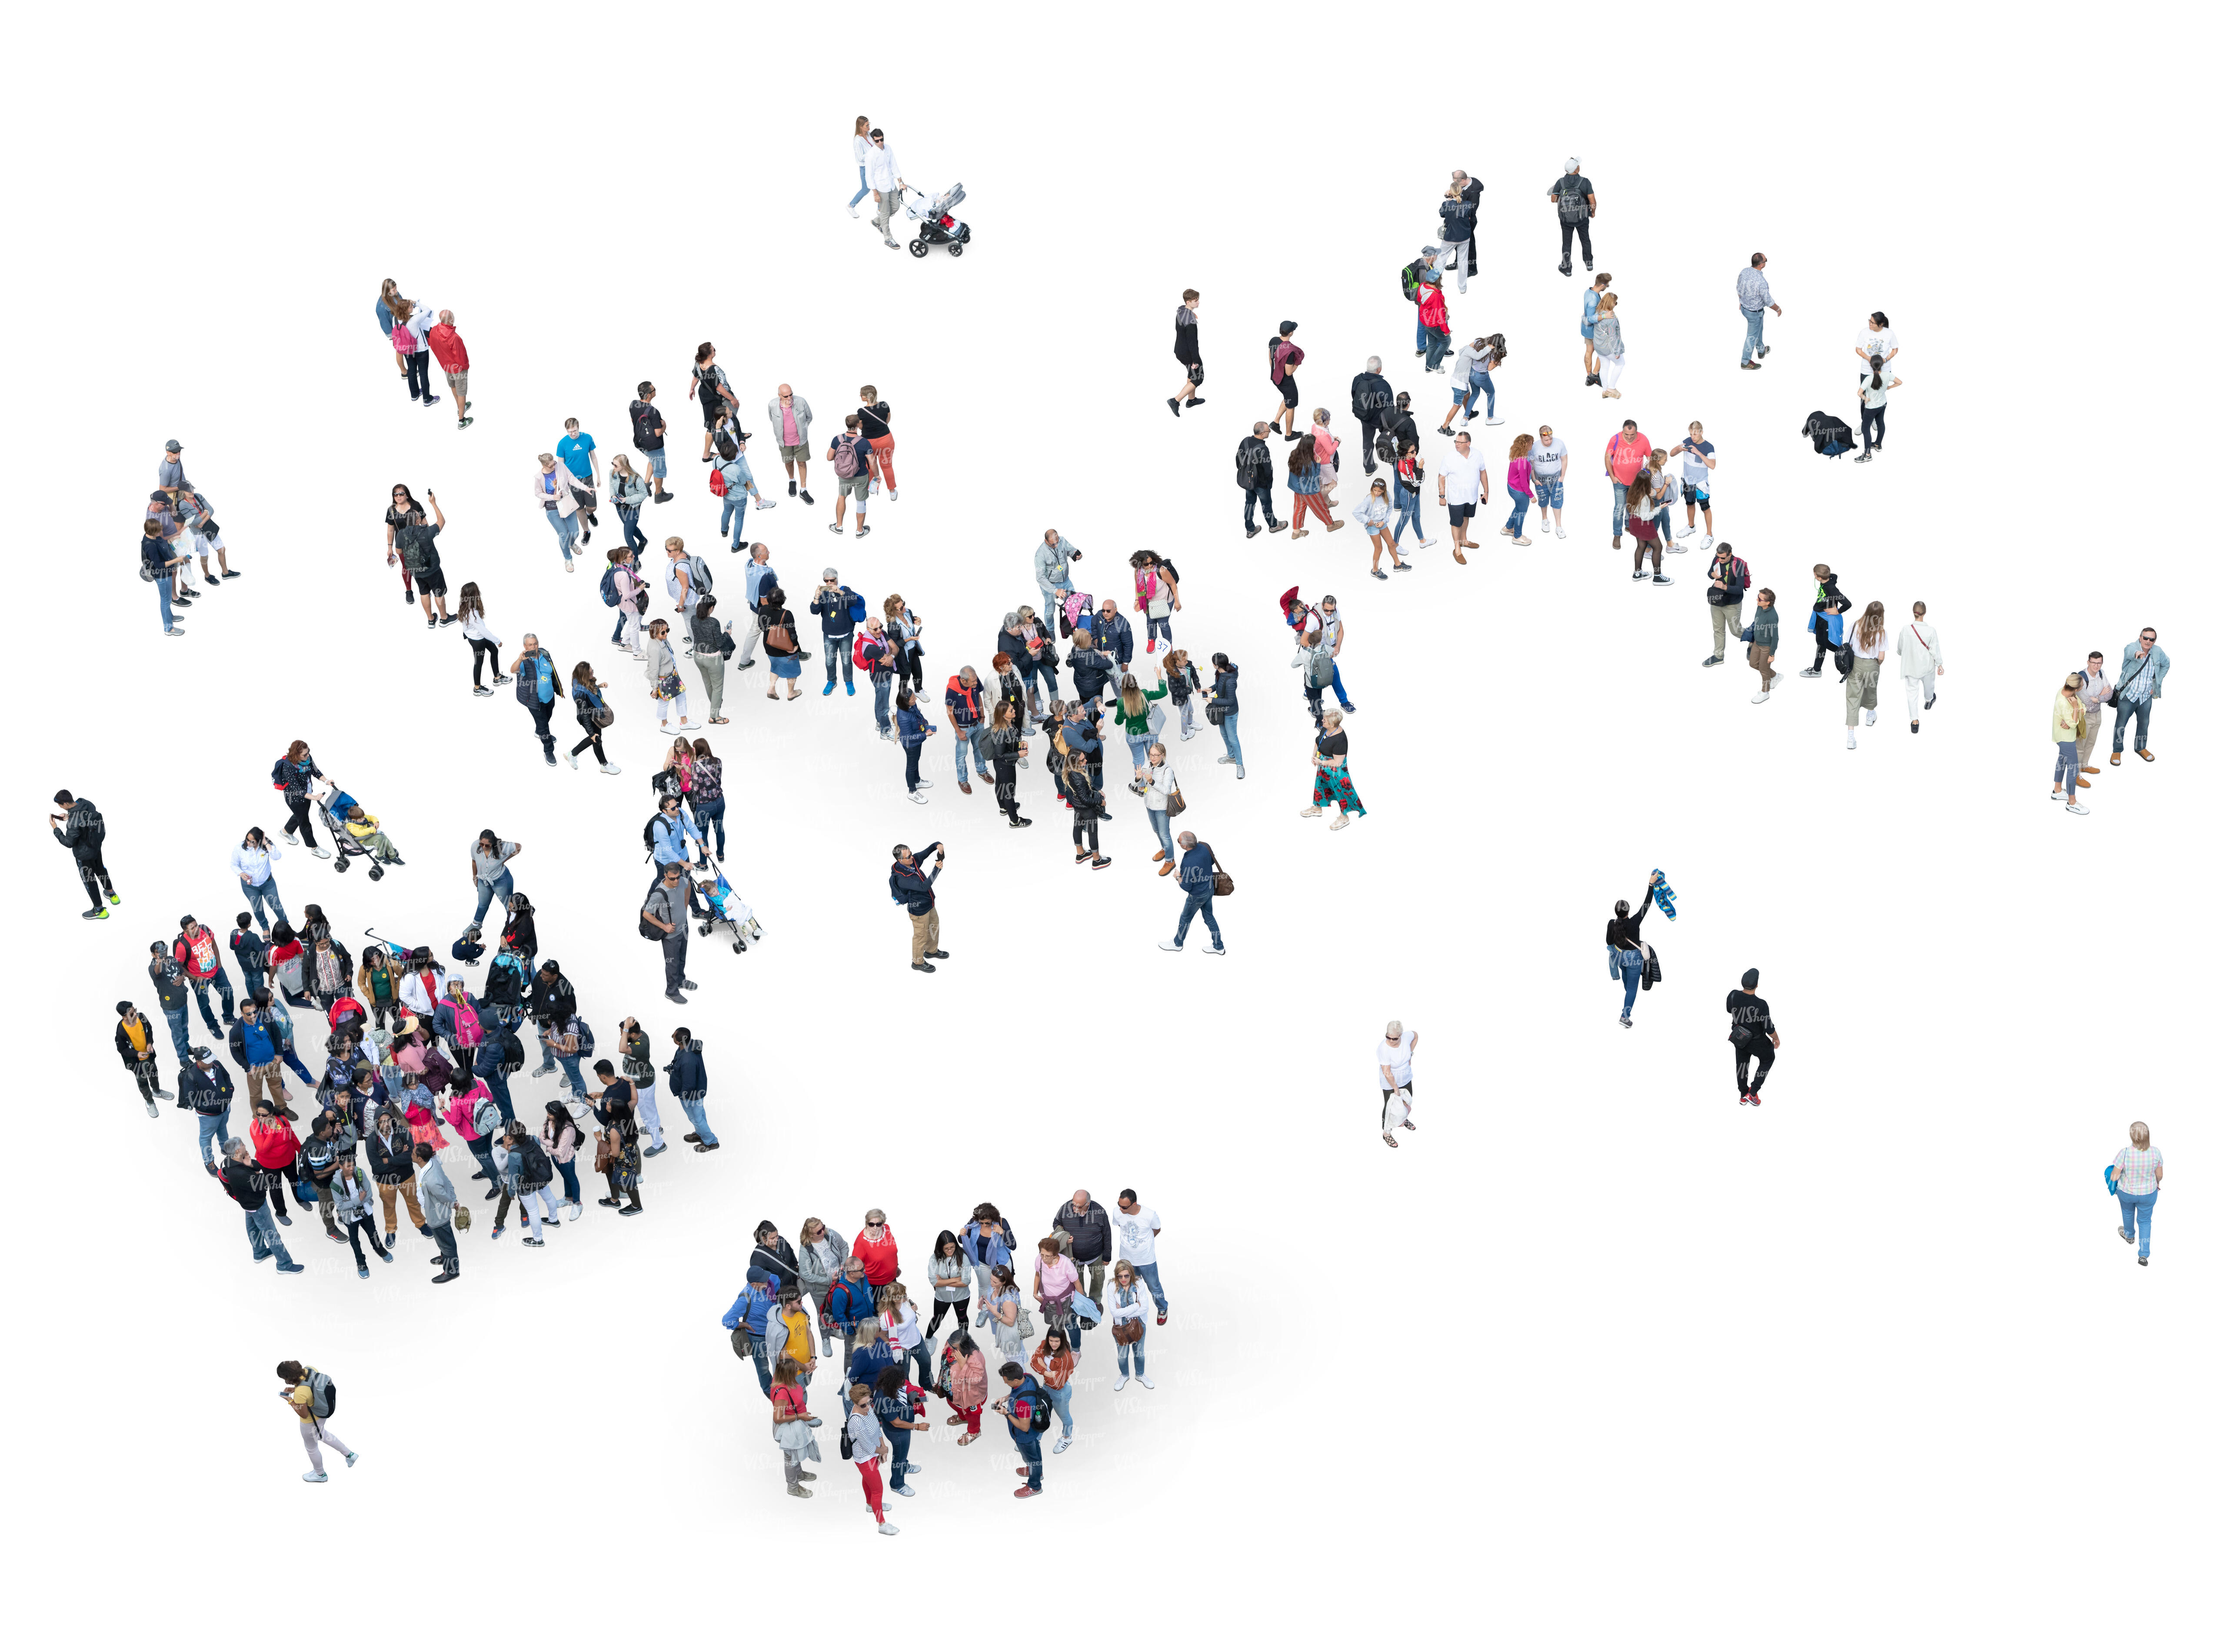 large group of people seen from above - VIShopper 